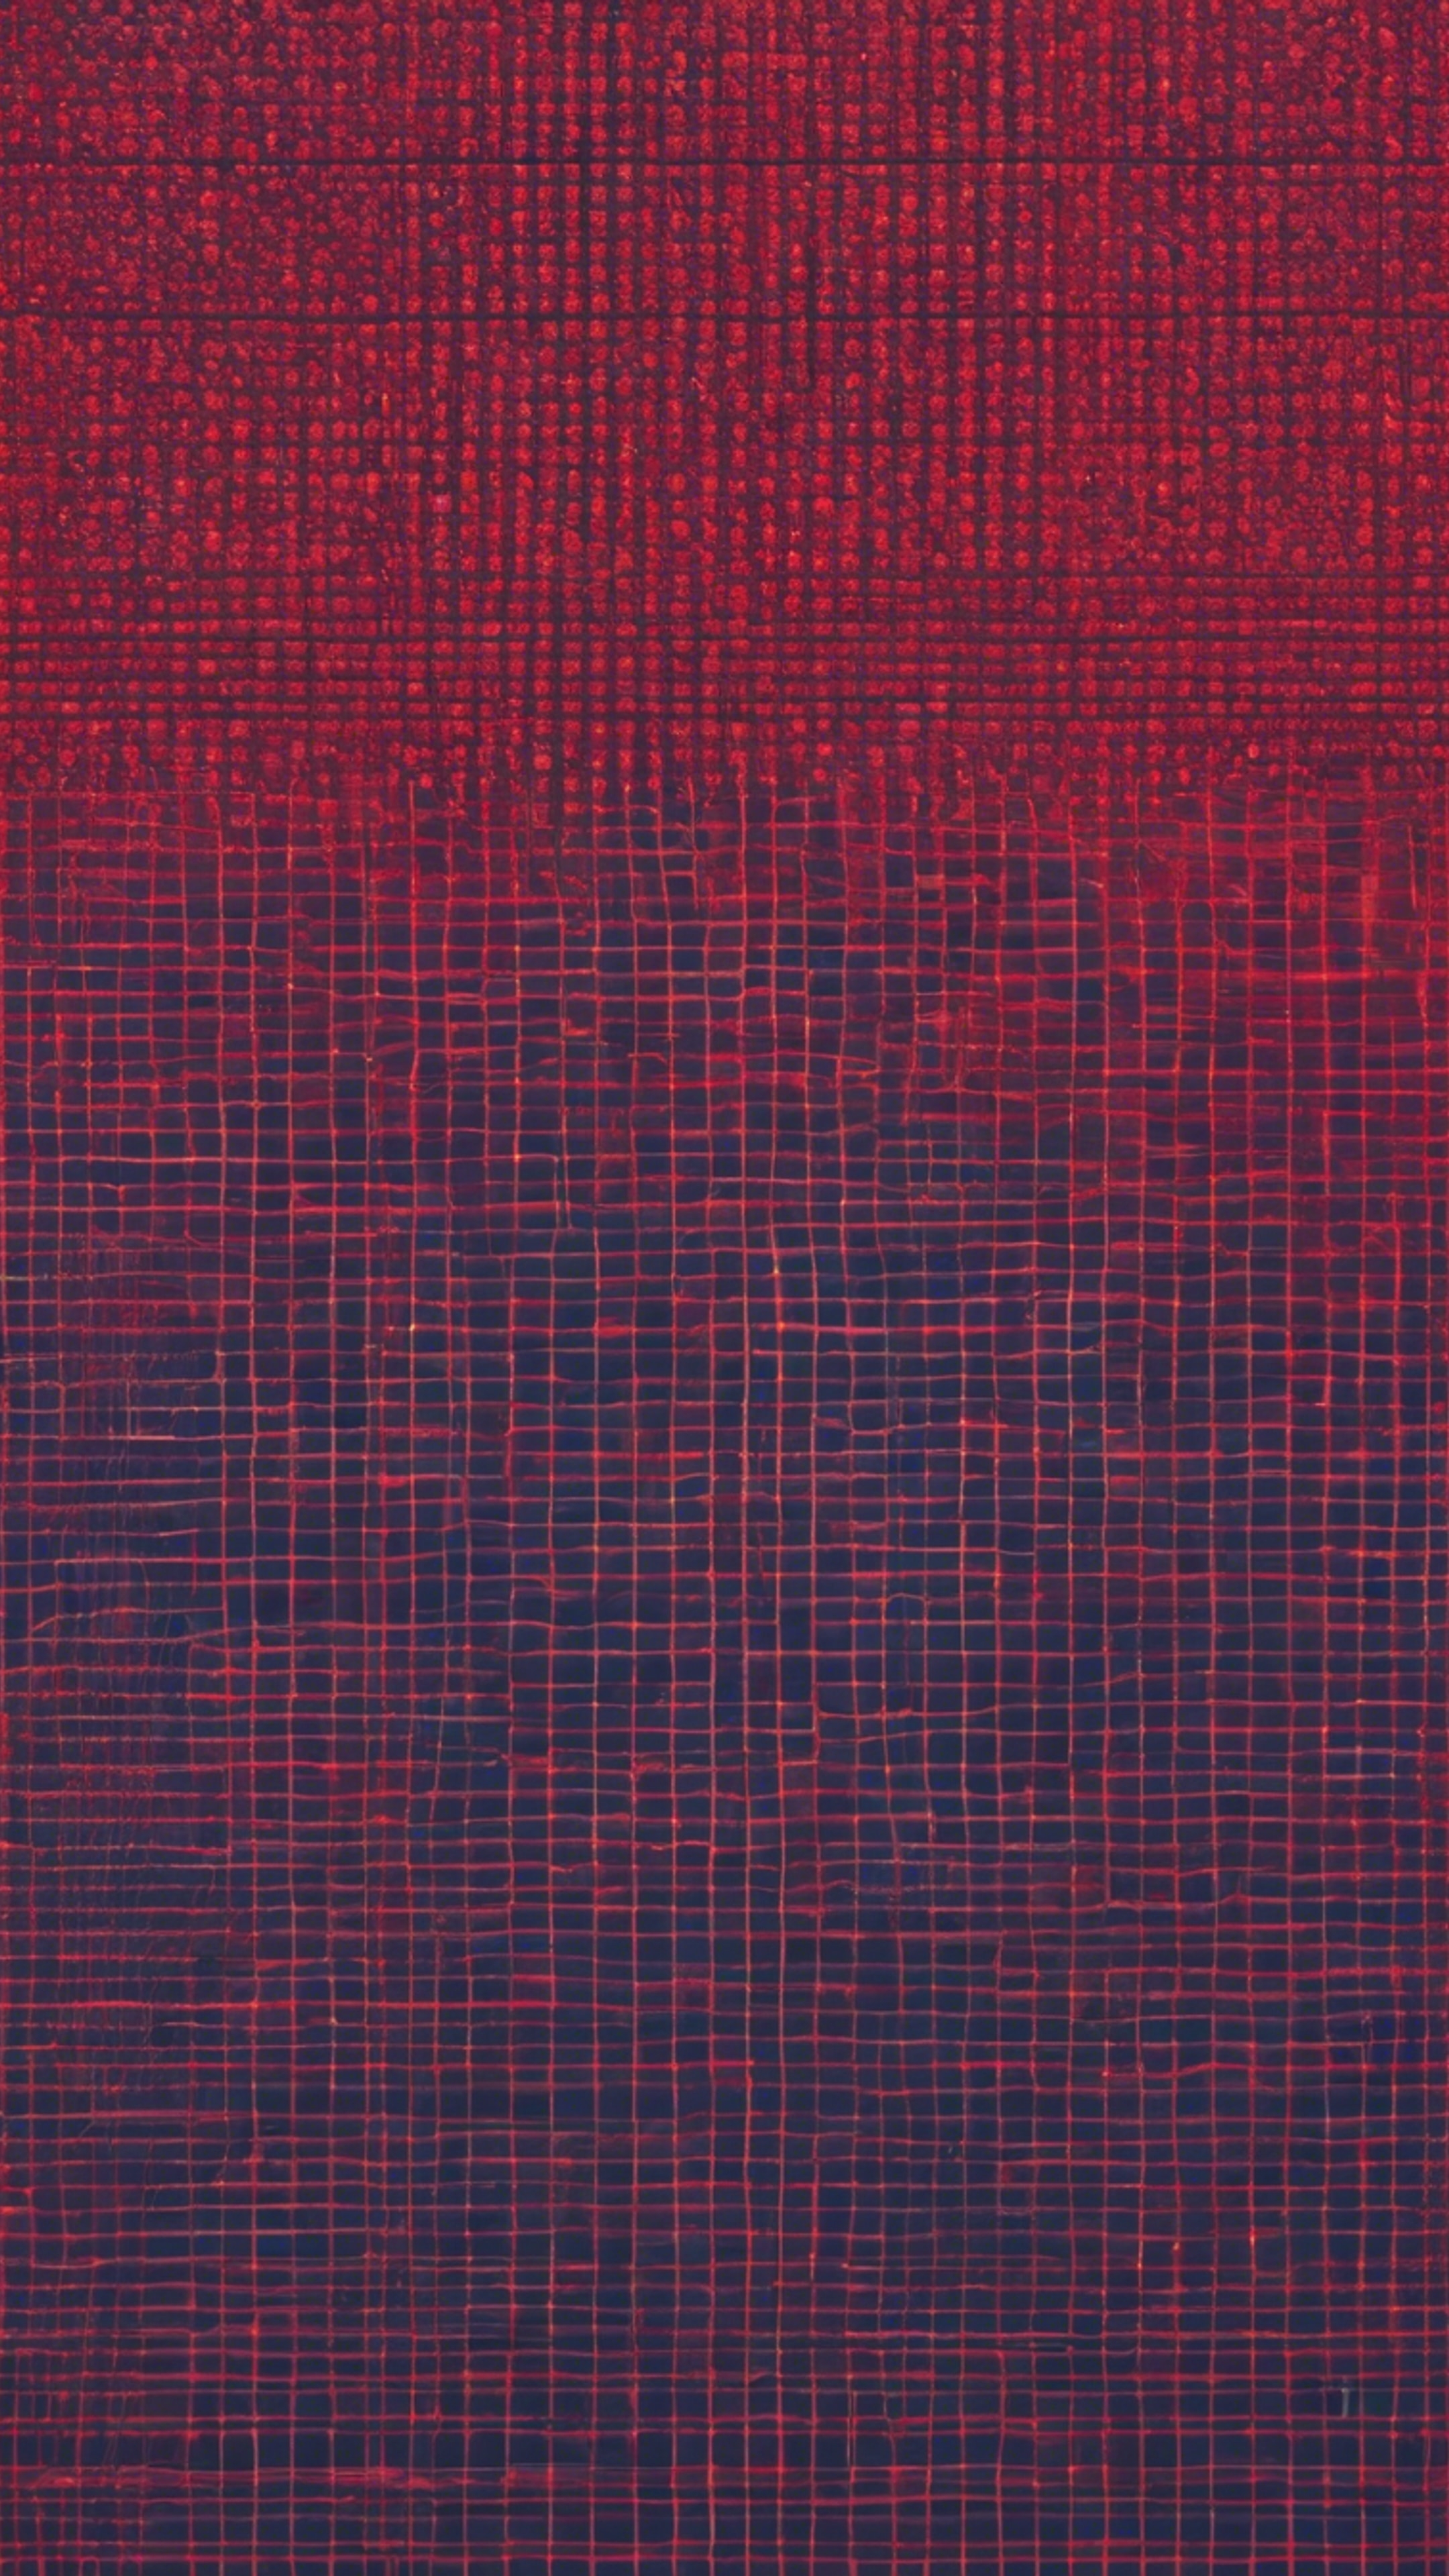 Tiny checks in a mix of red and navy blue colors, creating a seamless pattern.壁紙[d0b952814c844890a032]